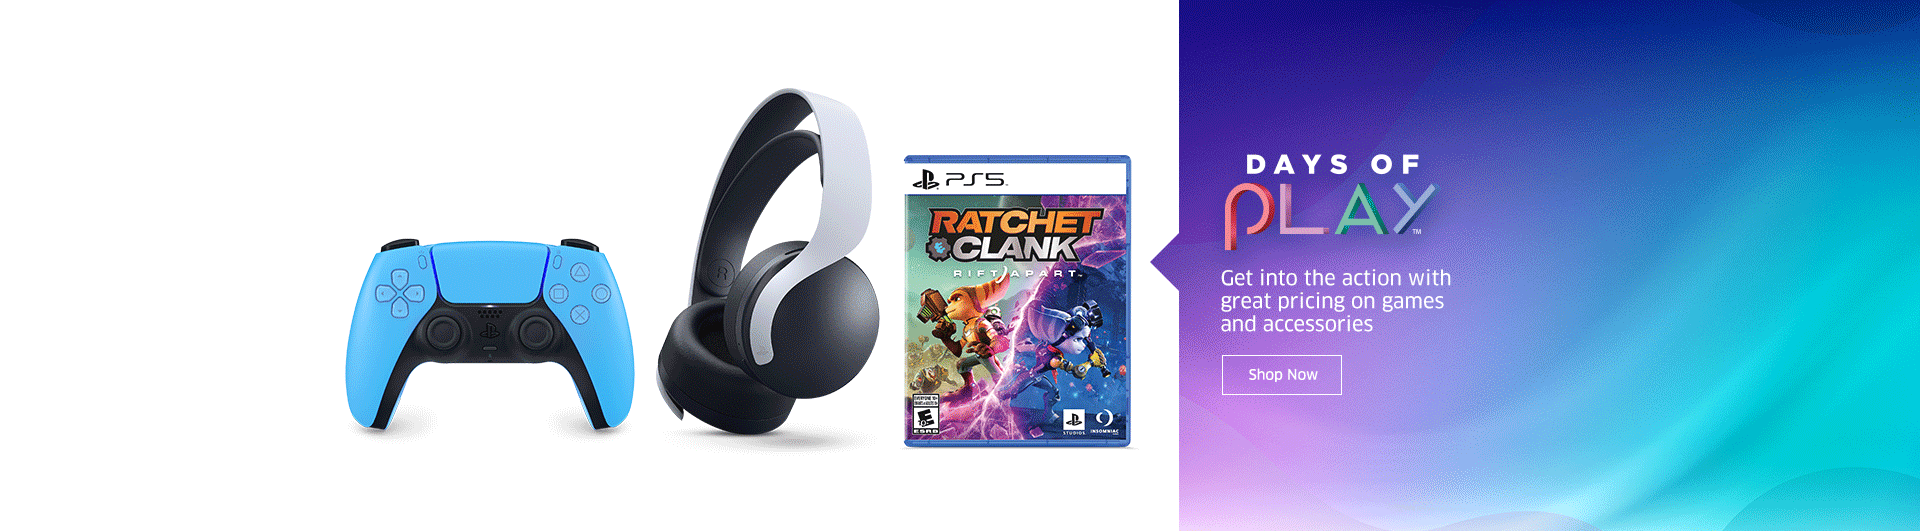 Celebrate Days of Play Get into the action with great pricing on games and accessories